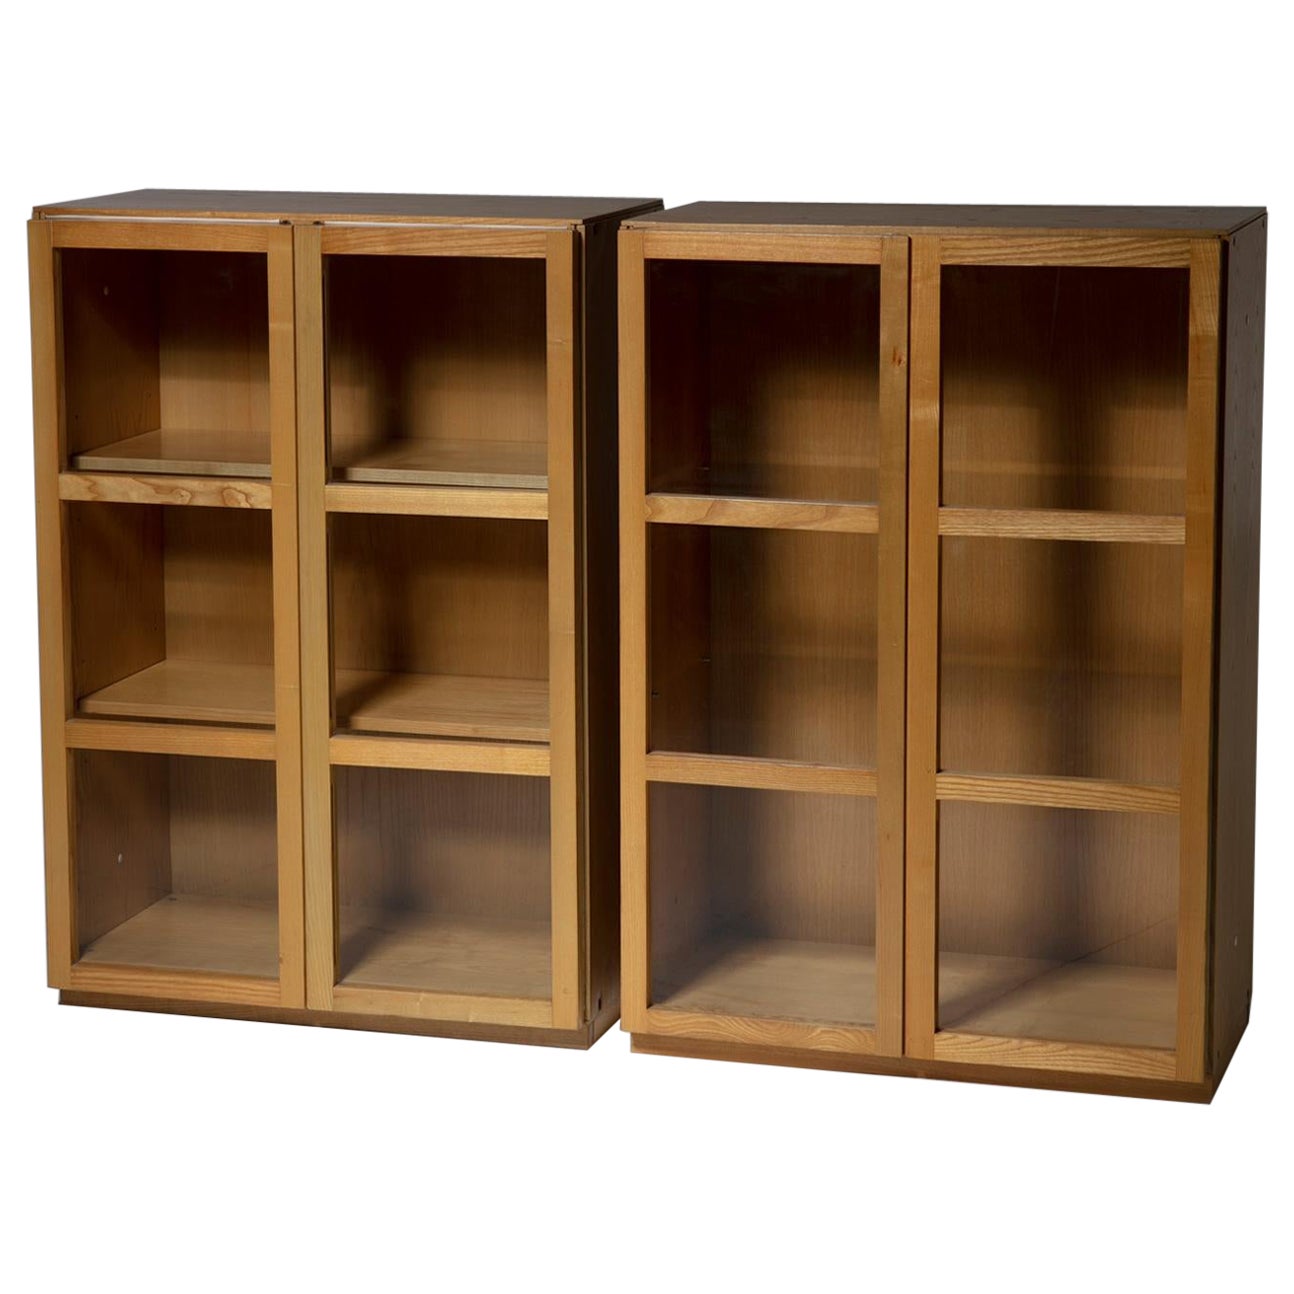 "Book" Storage Cabinets by Titti Fabiani for Ideal Form Team, Italy, 1960s For Sale